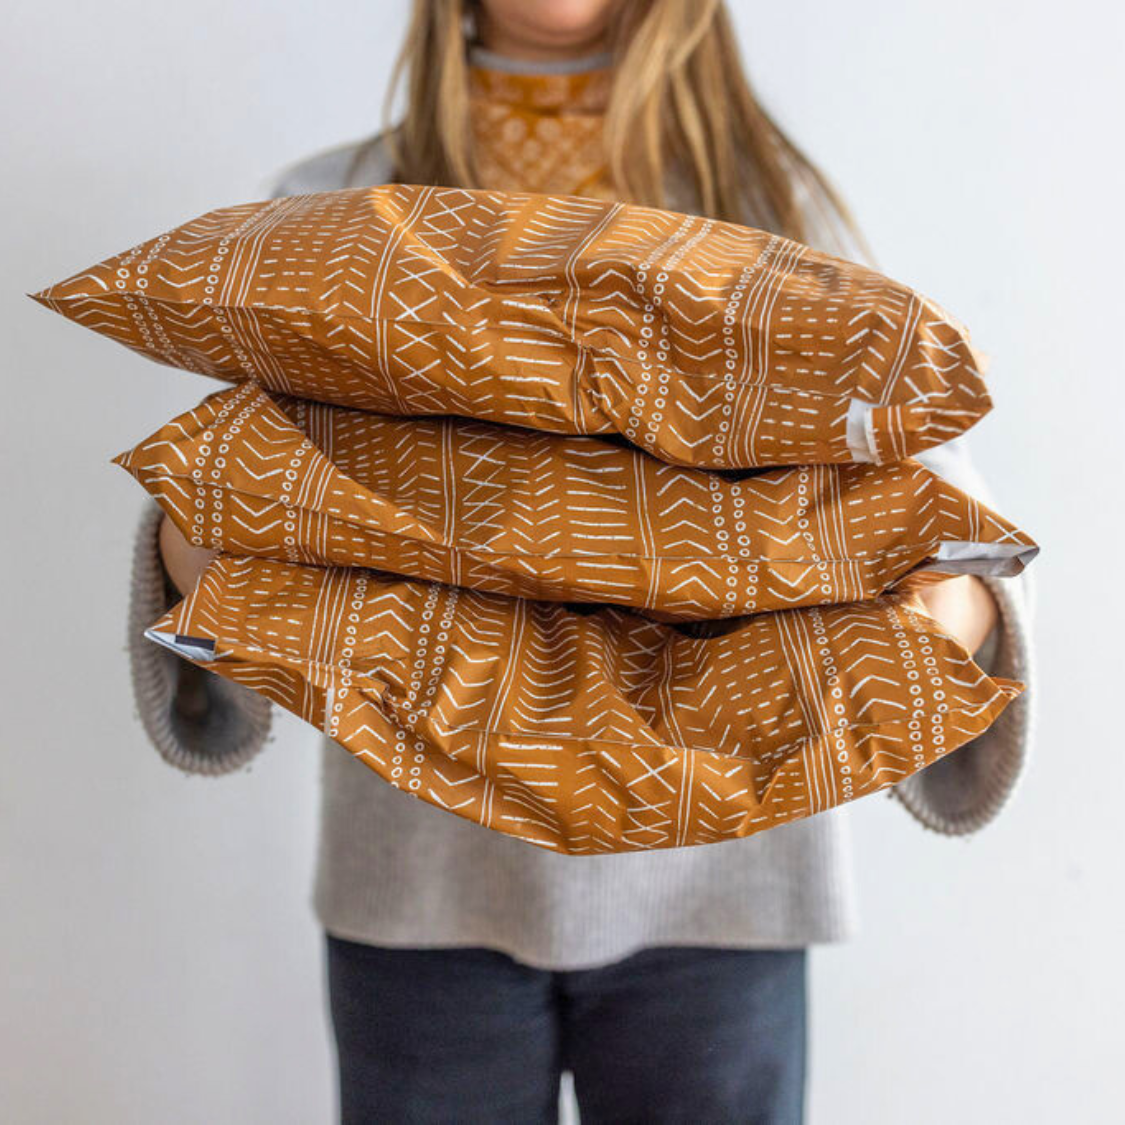 Woman holding Favorite Supplies' Boho Brown Poly Mailer in hand for a size comparison. Illustrates the stylish design and compact size (10x13) for convenient use.